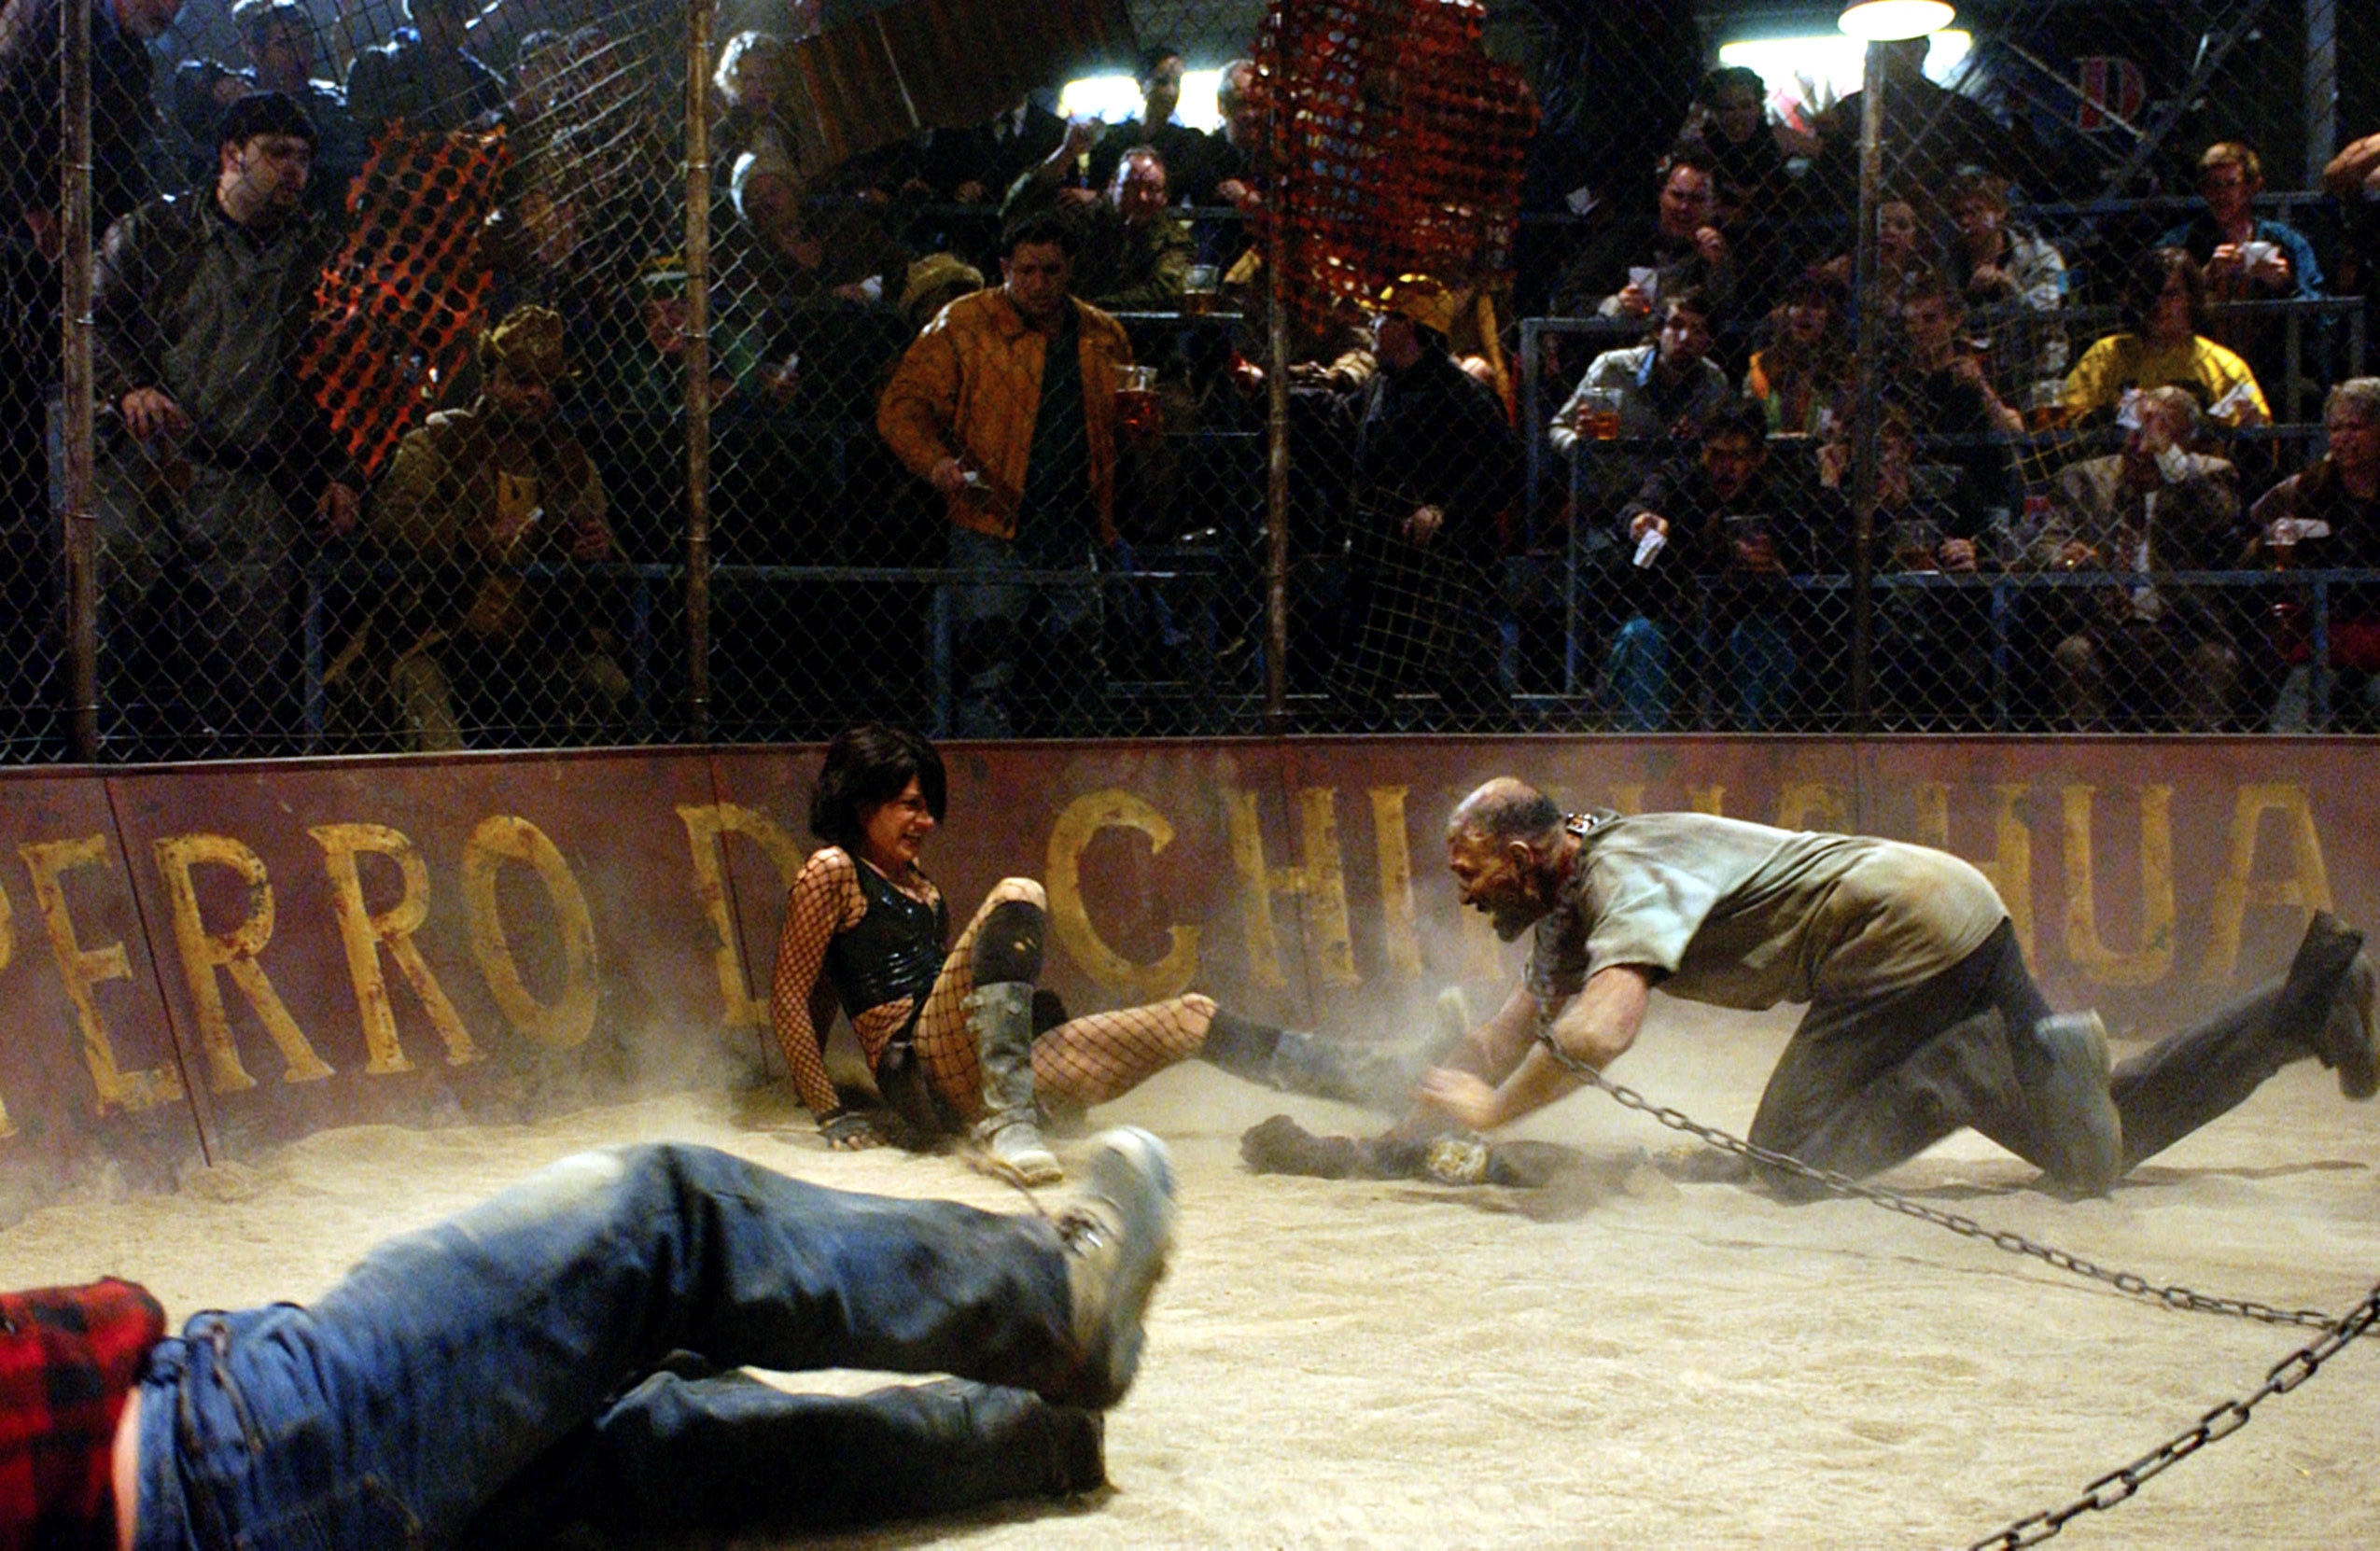 Crazed fans watch the visceral action in a zombie fight pit in &quot;Land of the Dead&quot;